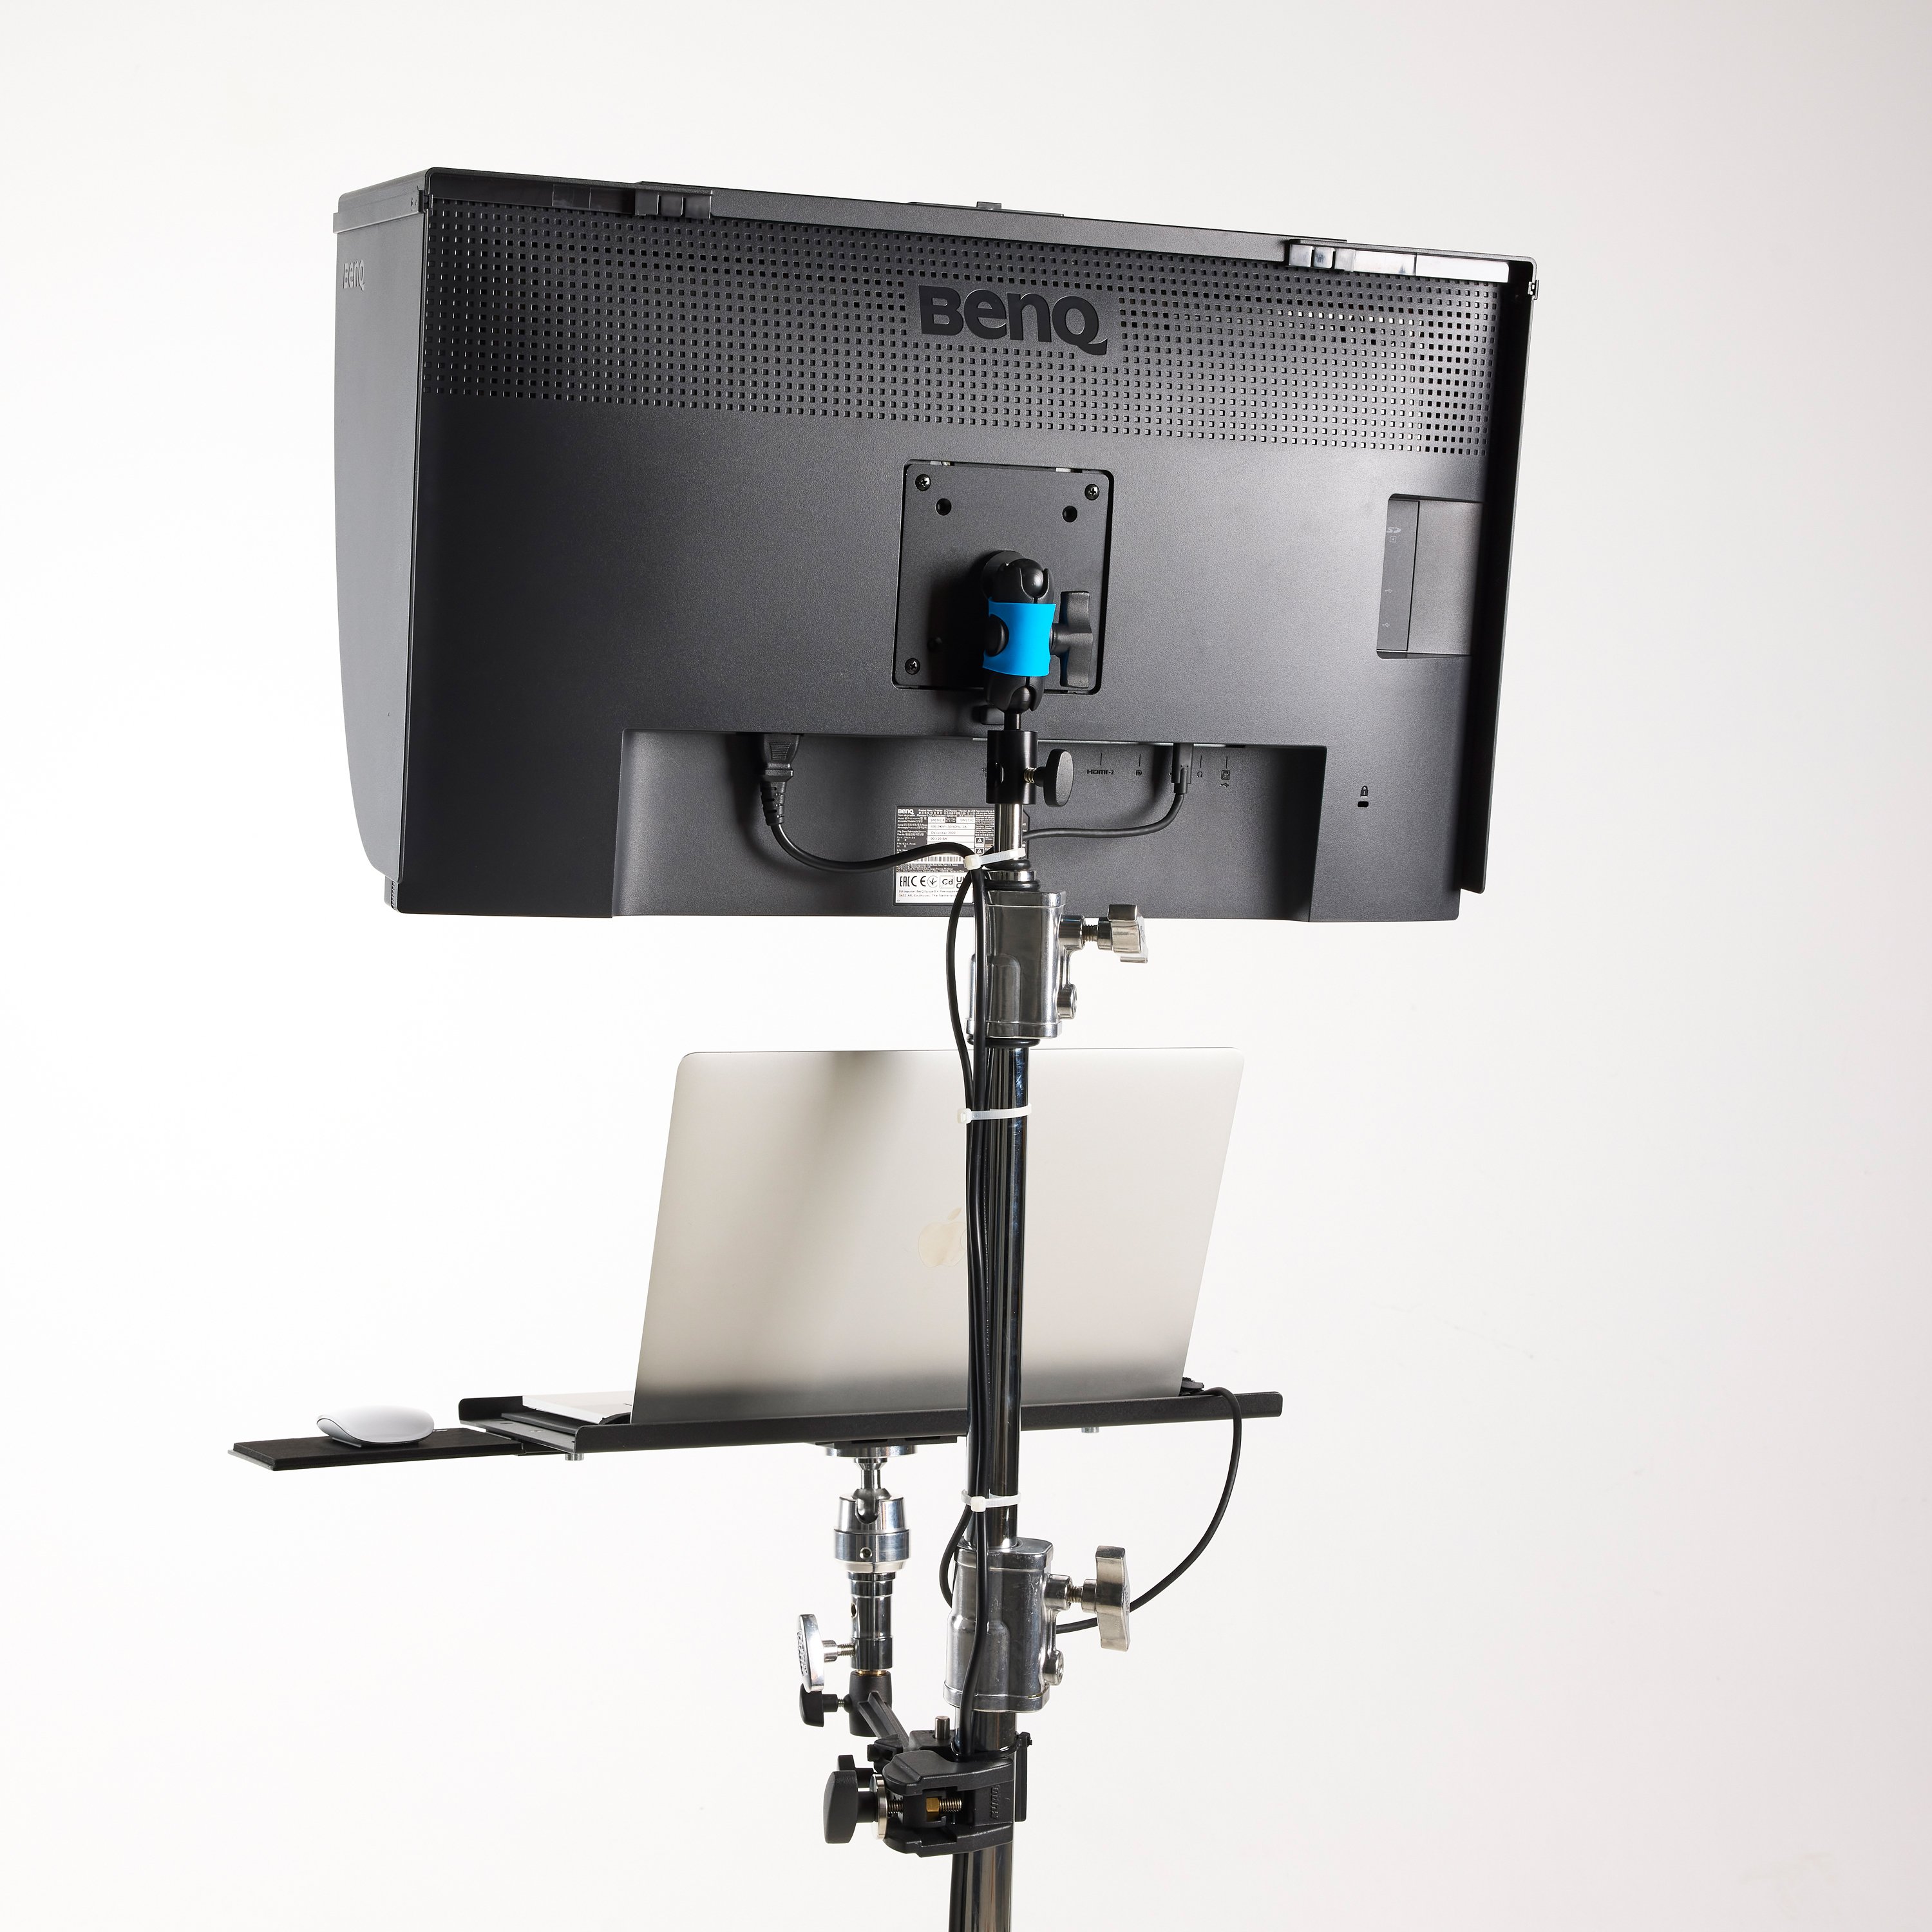 The SW271C attached to the 320M stand using the VESA mount and the KUPO VESA adapter mount